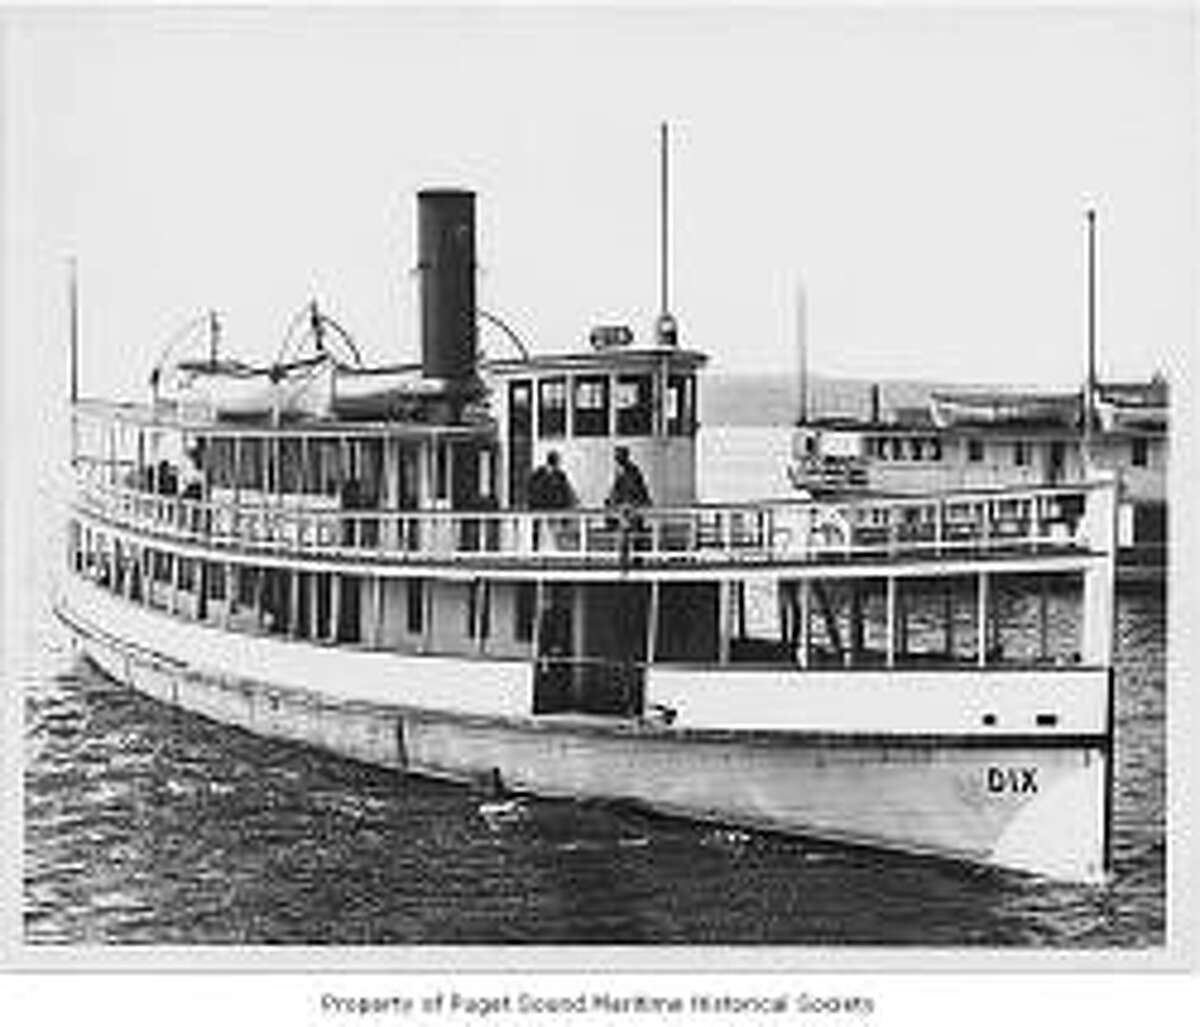 Passenger steamer launched by Craford & Reid at Tacoma in 1904. Designed for the short run across Elliott Bay to Alki Point, it made 19 round trips daily.